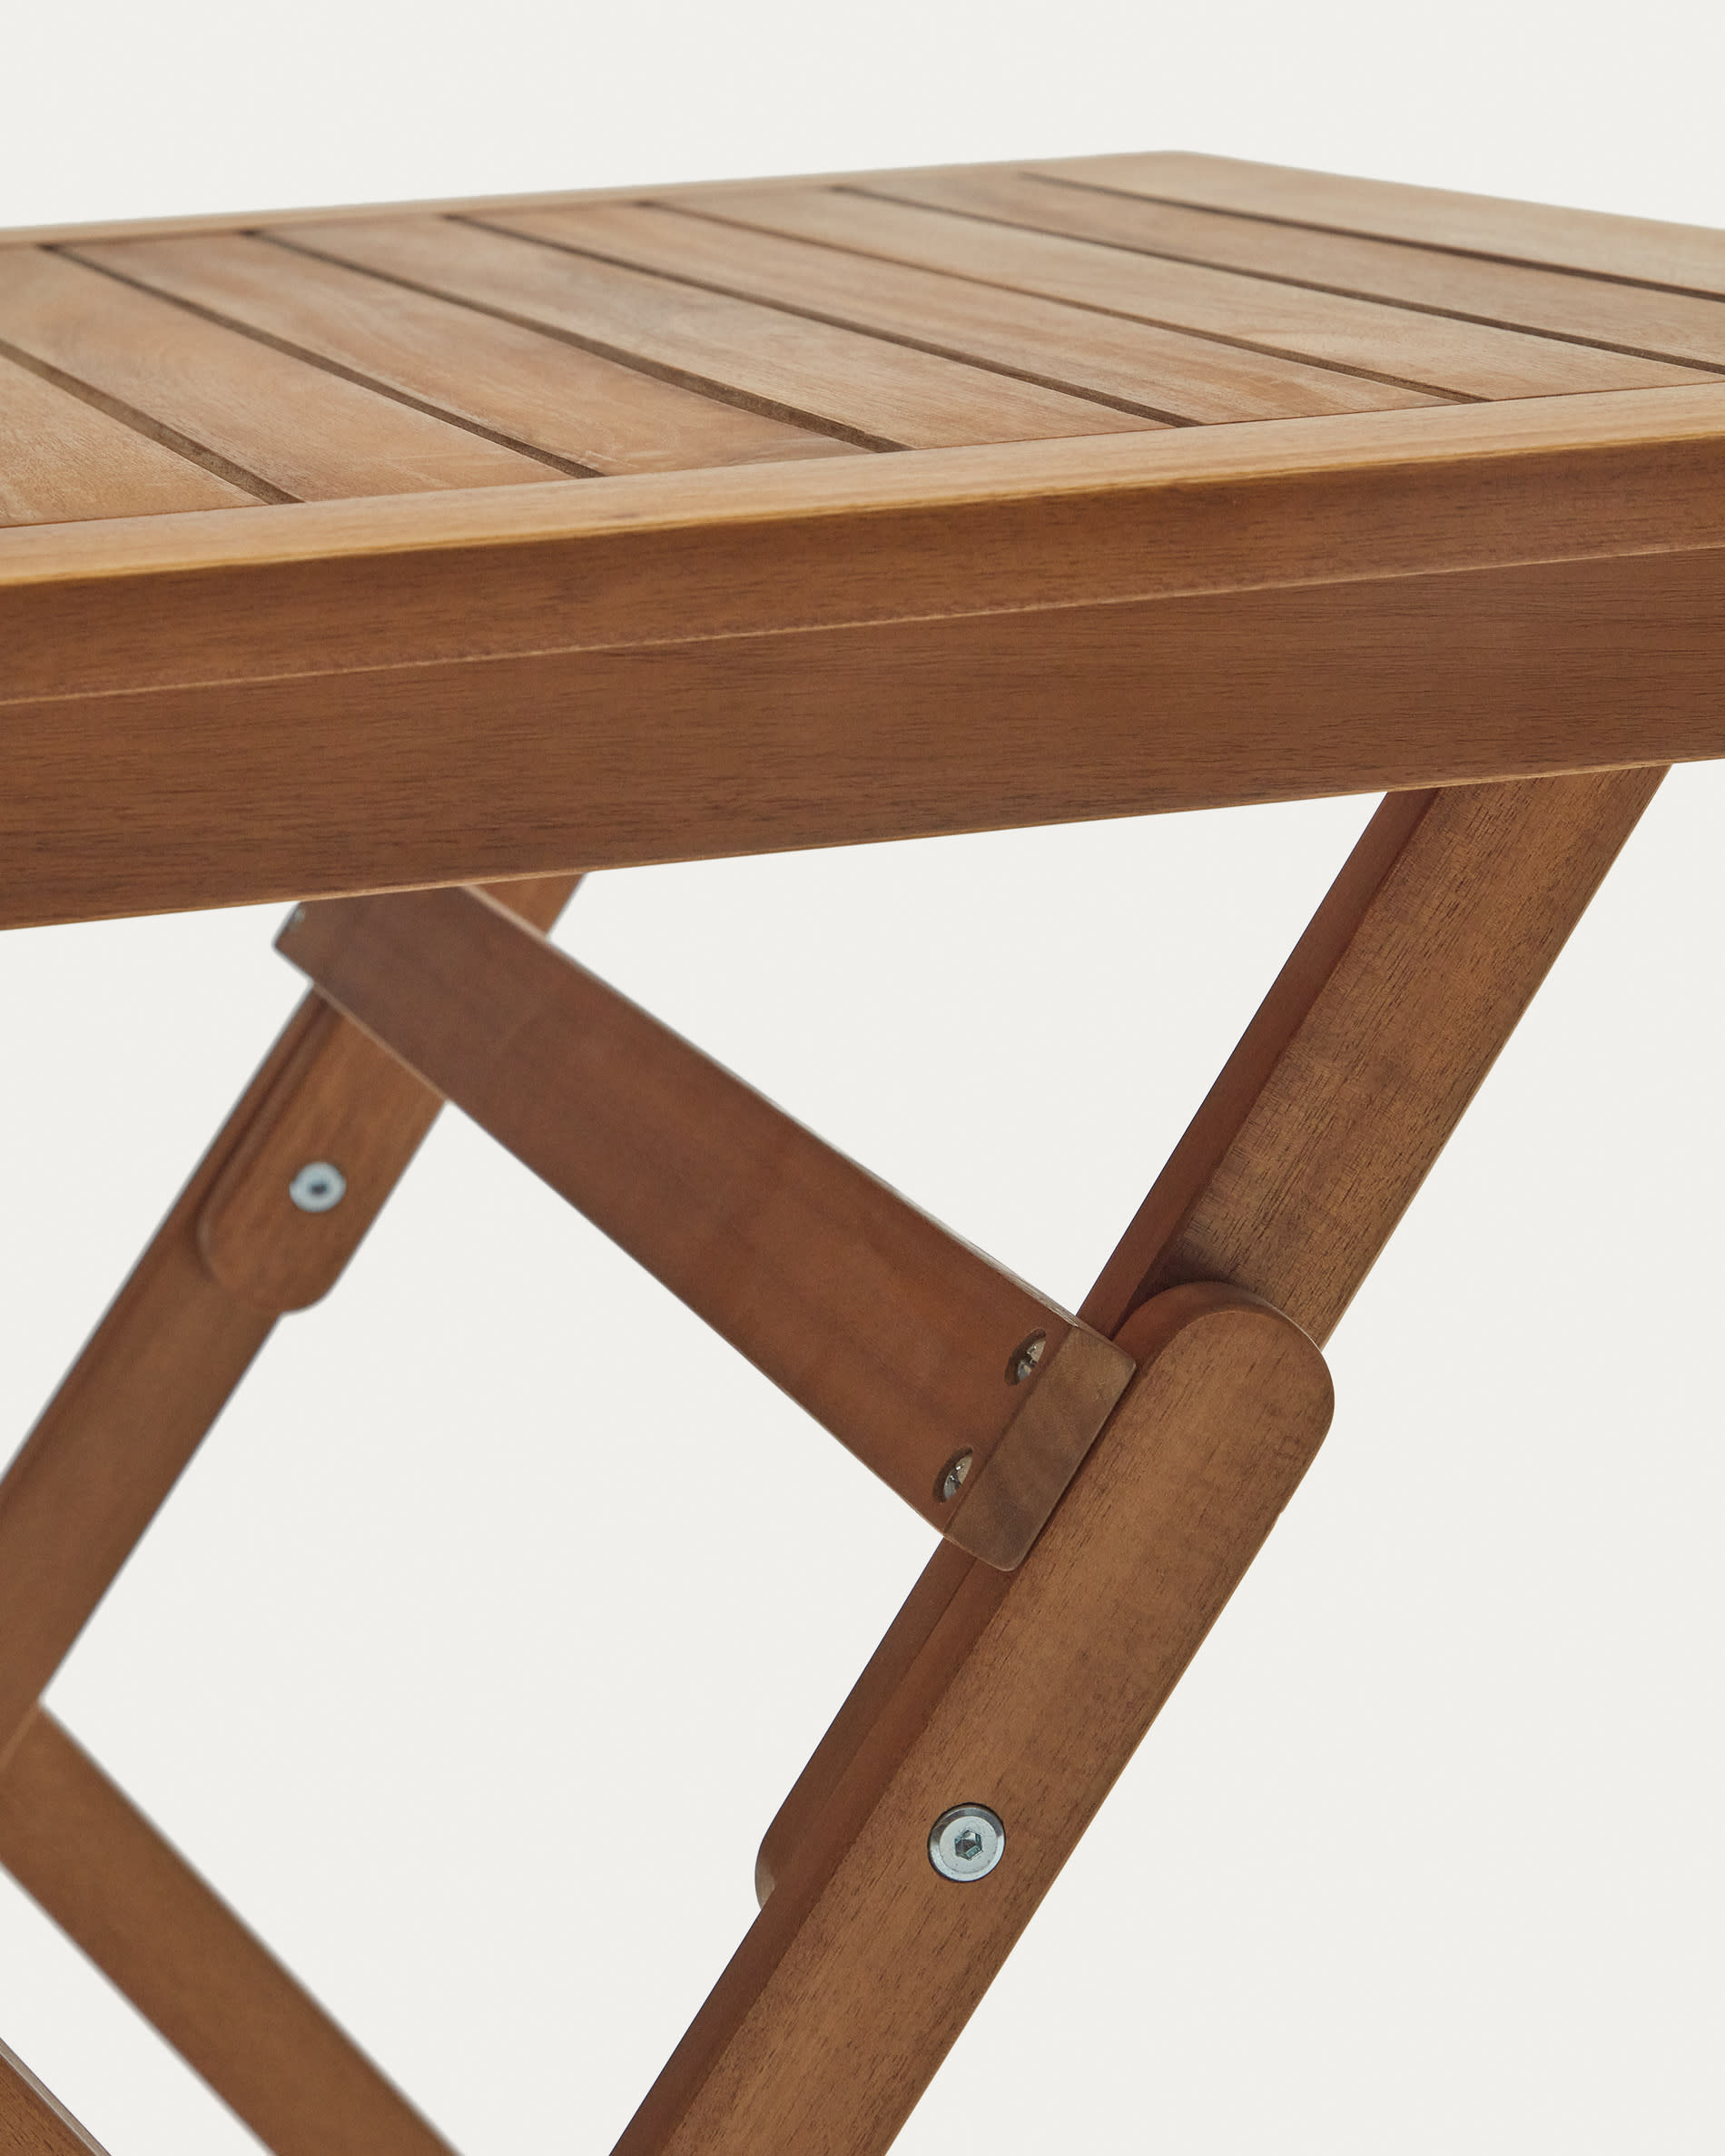 Sadirar folding outdoor table made from solid acacia wood 70 x 70 cm FSC  100%